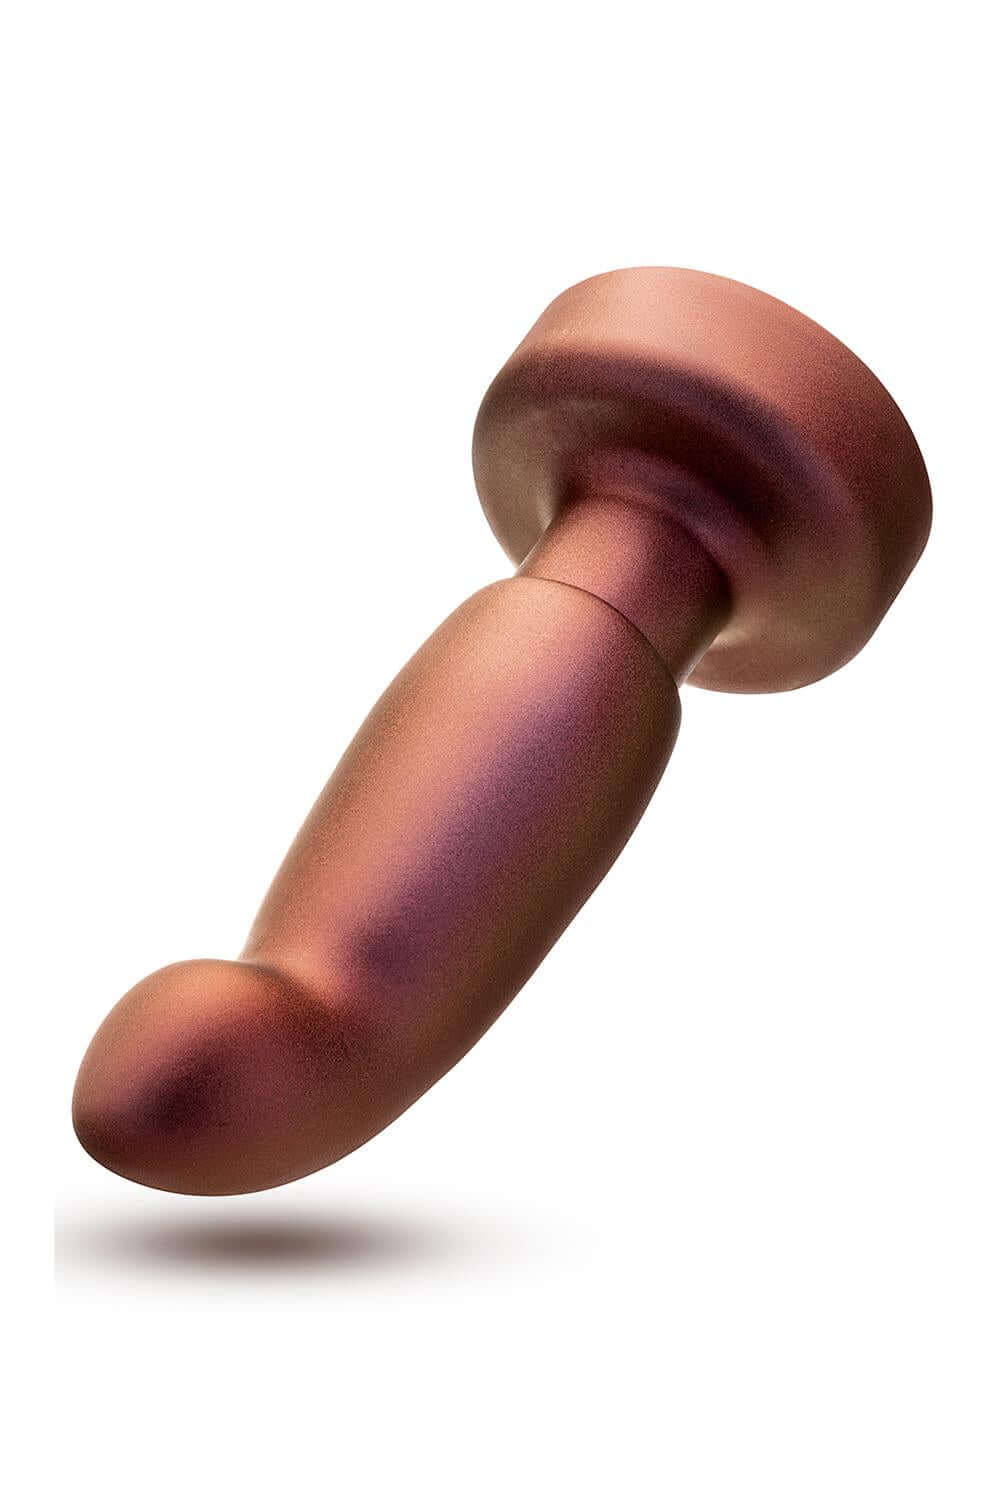 Anal Adventures Matrix Bionic Silicone Butt Plug by Blush - perfect for shower play